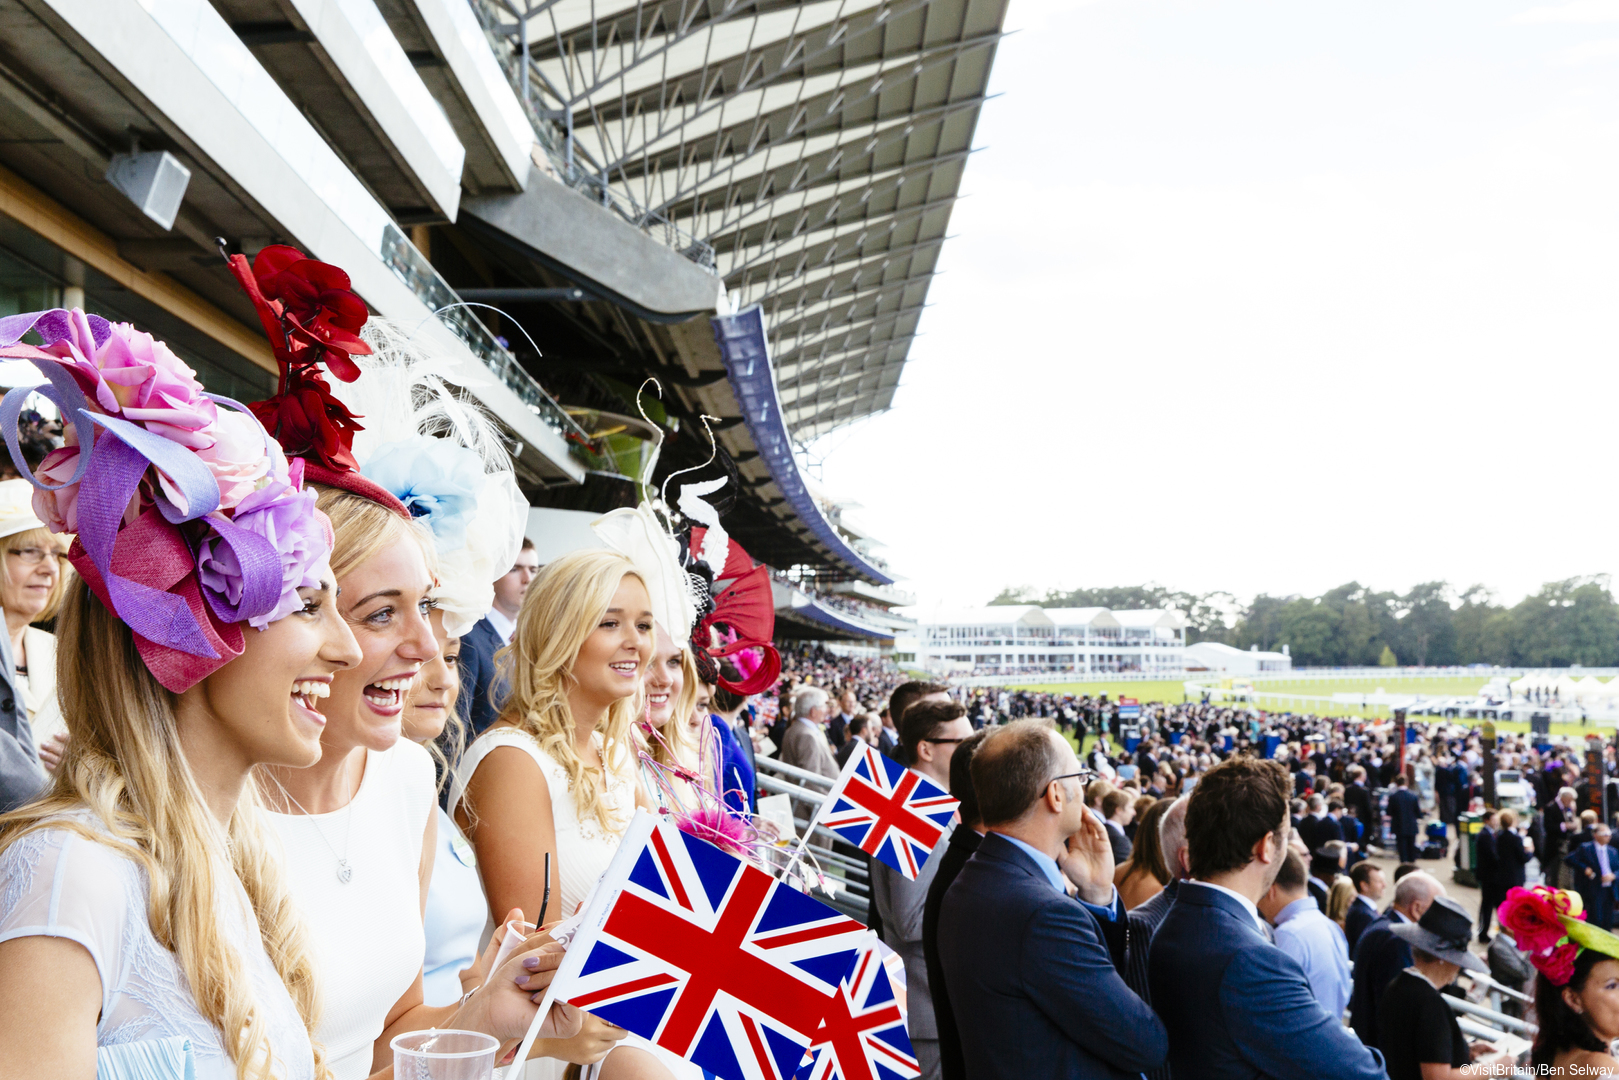 Royal Ascot Race Meeting at the prestigious Ascot racecourse in Berkshire. Smiling young women wearing dresses and hats, watching a race from the grandstand.